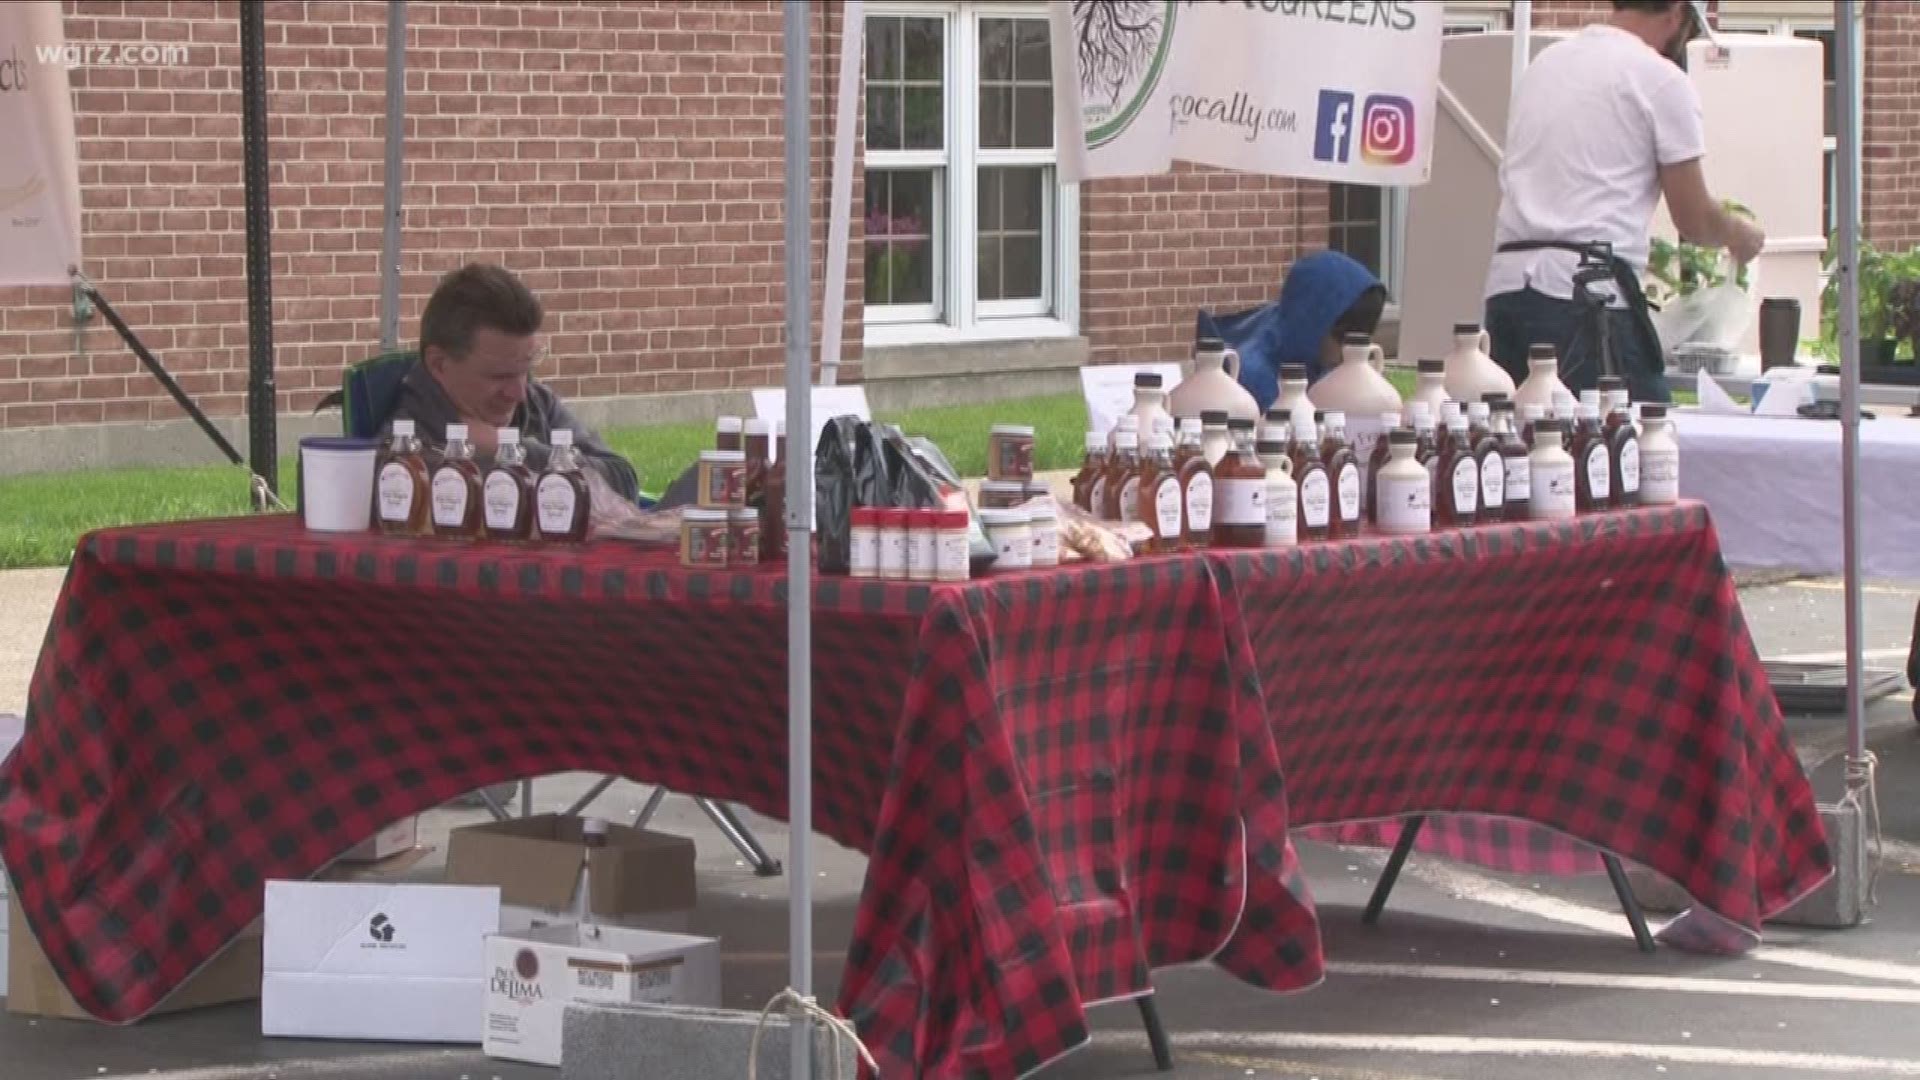 Today the Williamsville Farmers Market opened for the season.